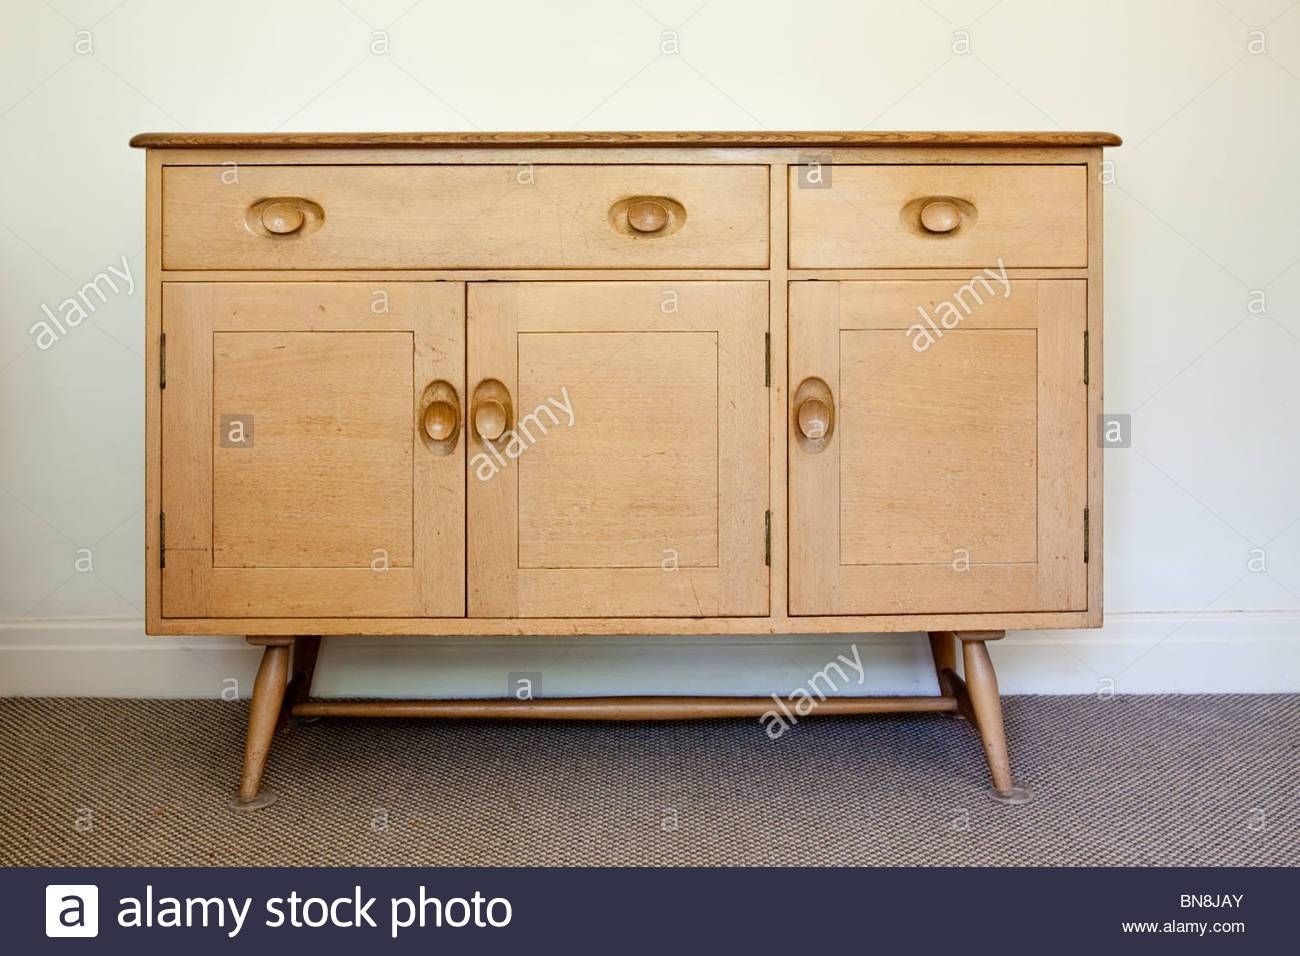 1950s Furniture Stock Photos & 1950s Furniture Stock Images – Alamy Throughout 50s Sideboards (View 11 of 15)